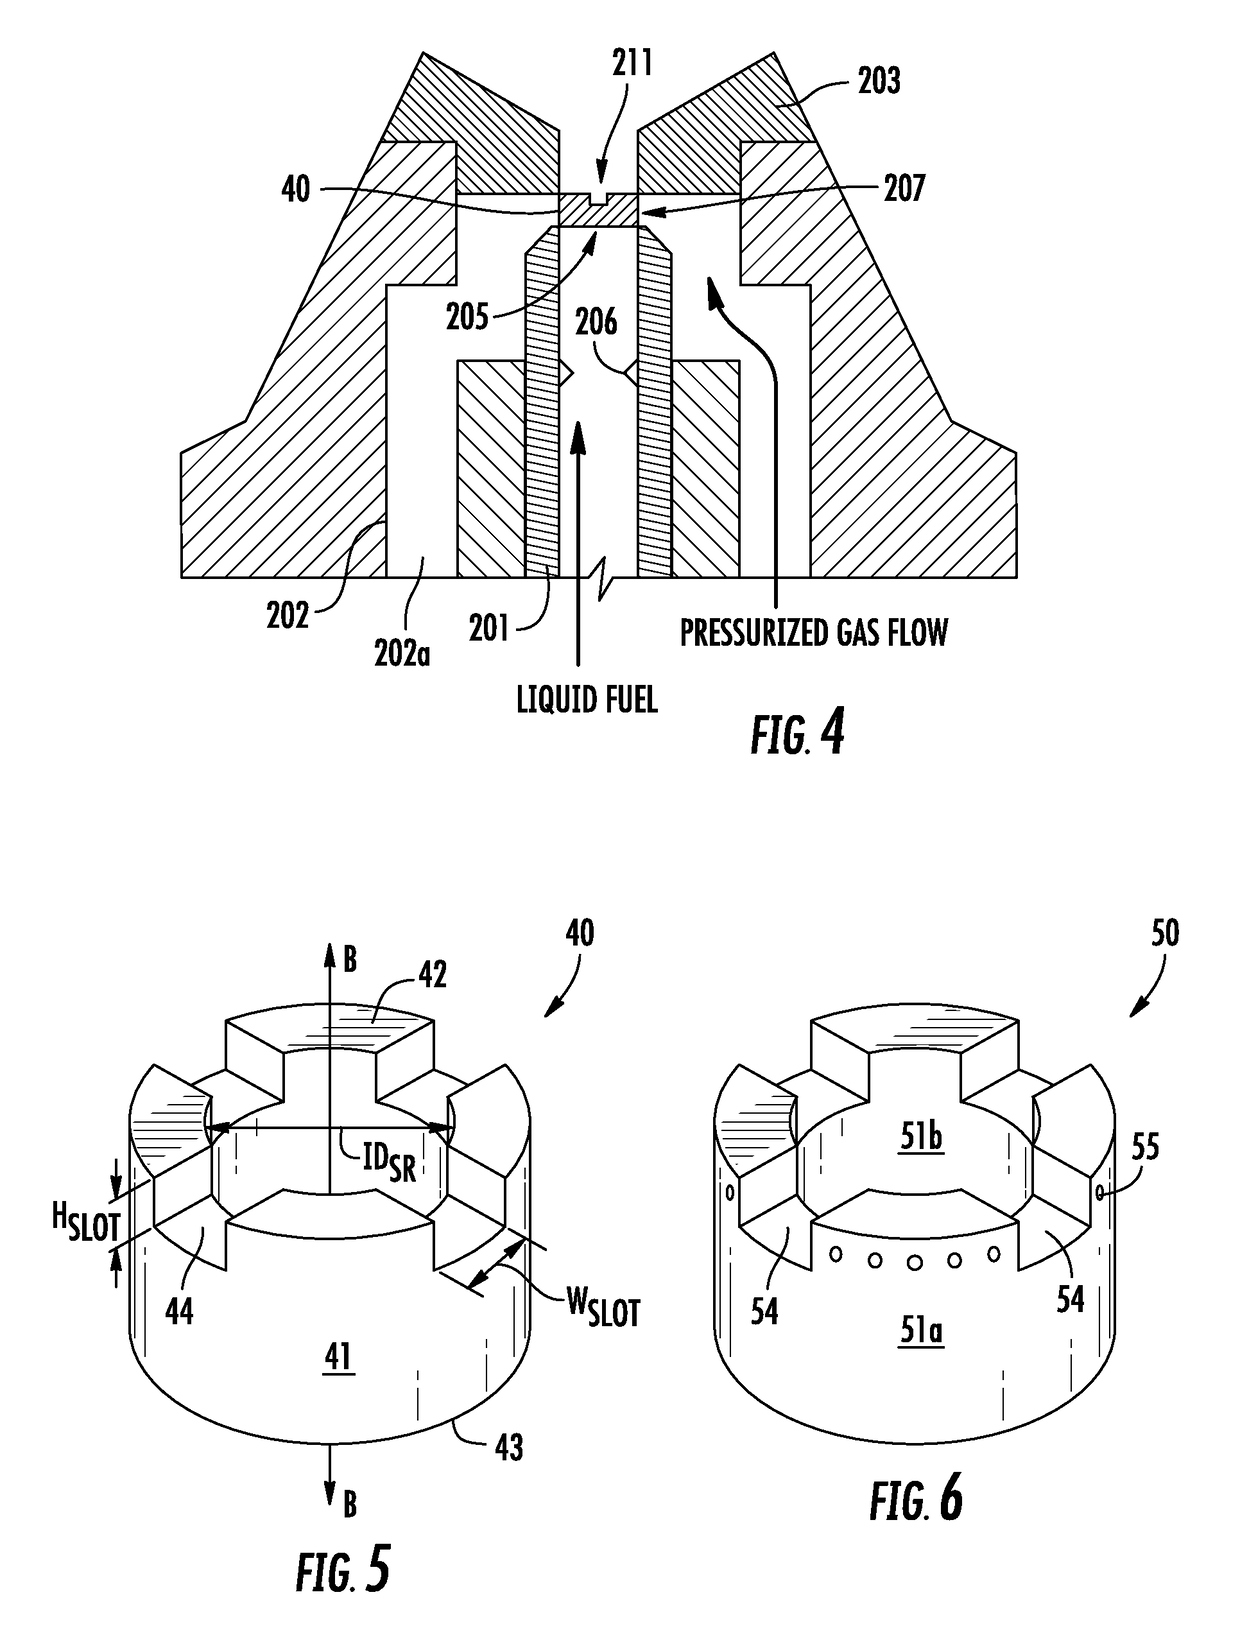 Combustor assembly for low-emissions and alternate liquid fuels